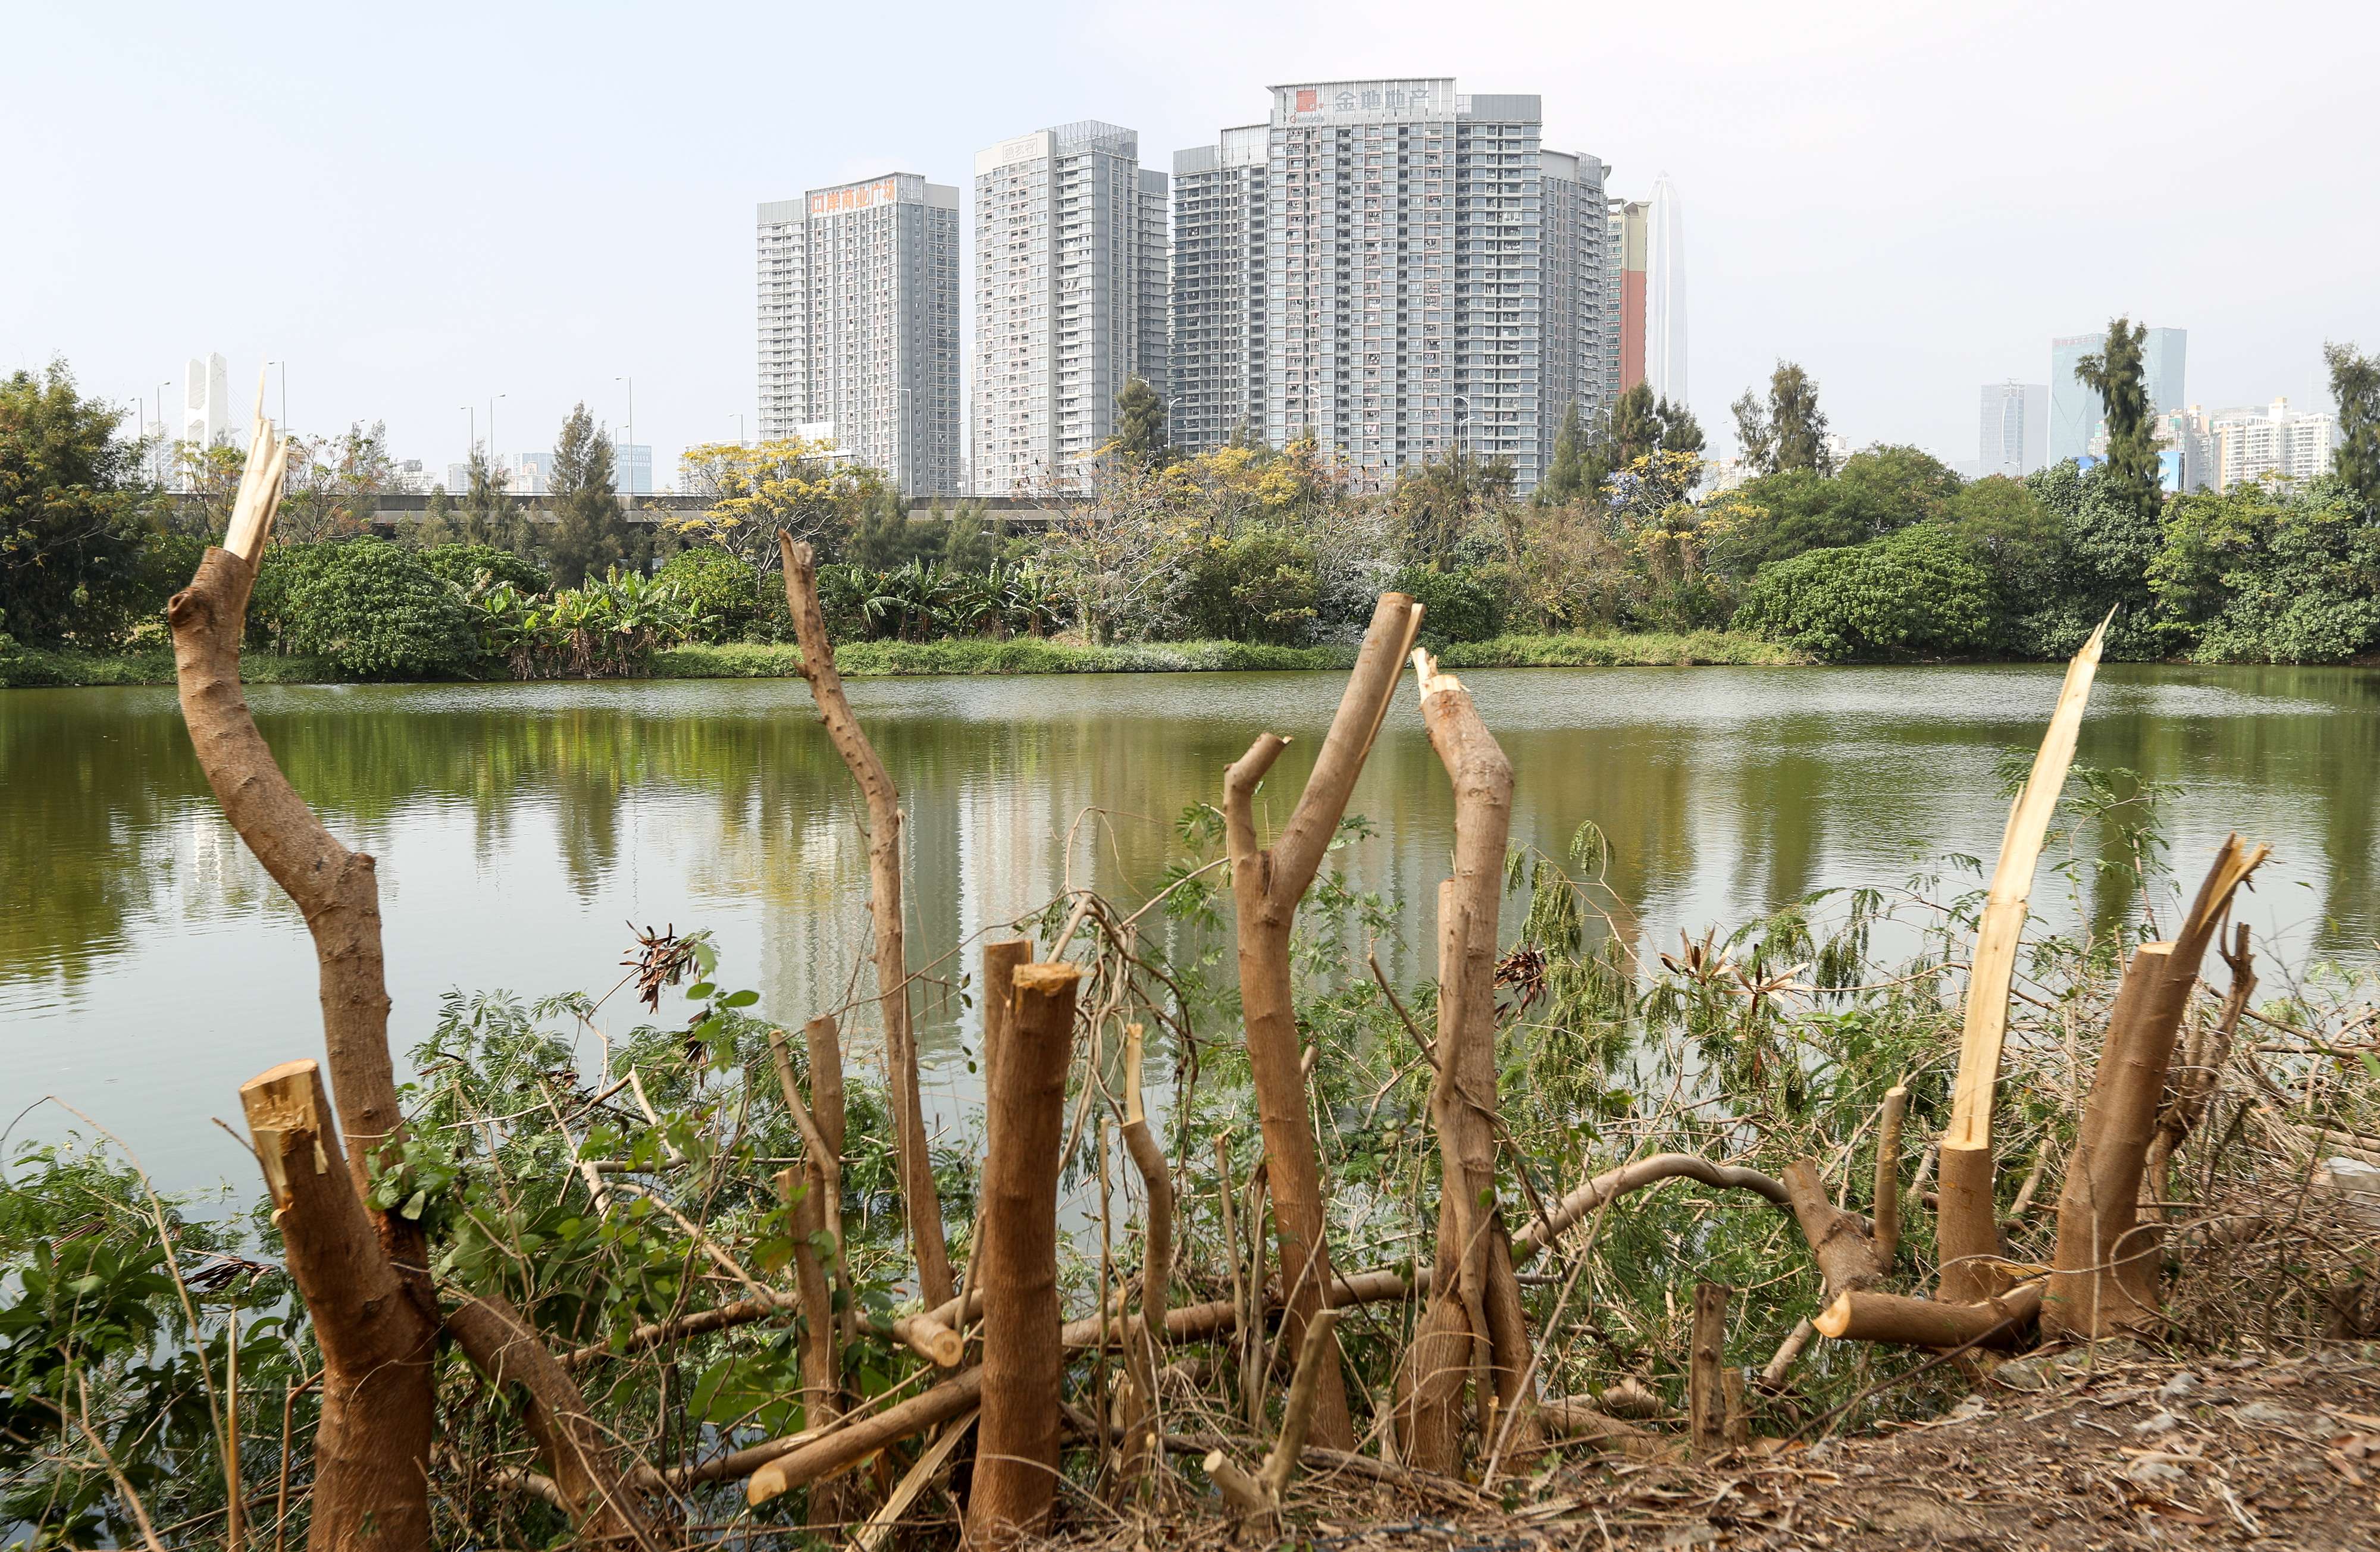 The Lok Ma Chau Loop area, seen from the Hong Kong side, overlooking the Shenzhen River. Hong Kong and Shenzhen have agreed to develop the area into an innovation and technology park. Photo: Nora Tam